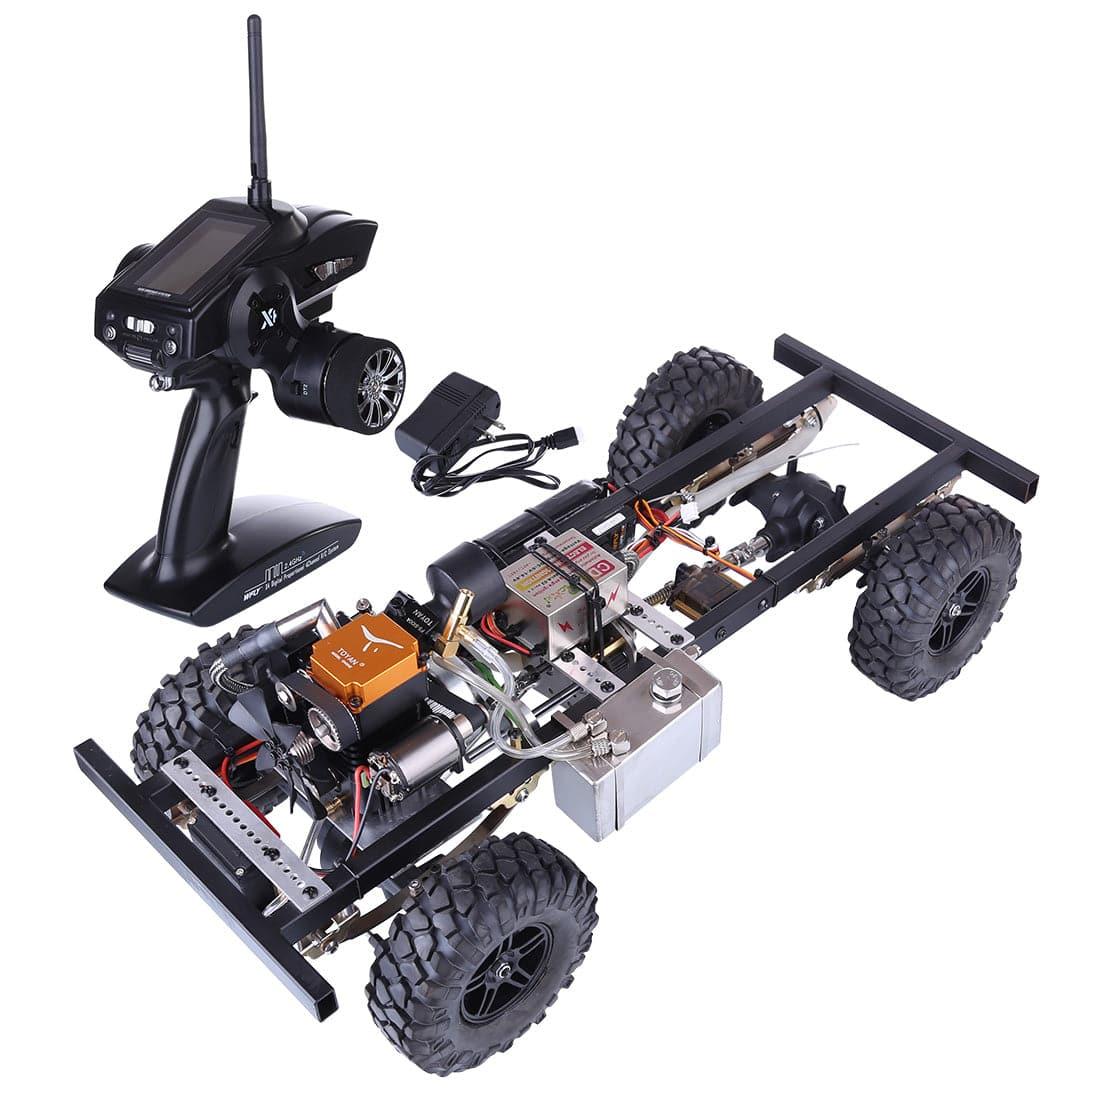 Gas Powered Rc Cars For Beginners: Regular maintenance is key for gas-powered RC cars.